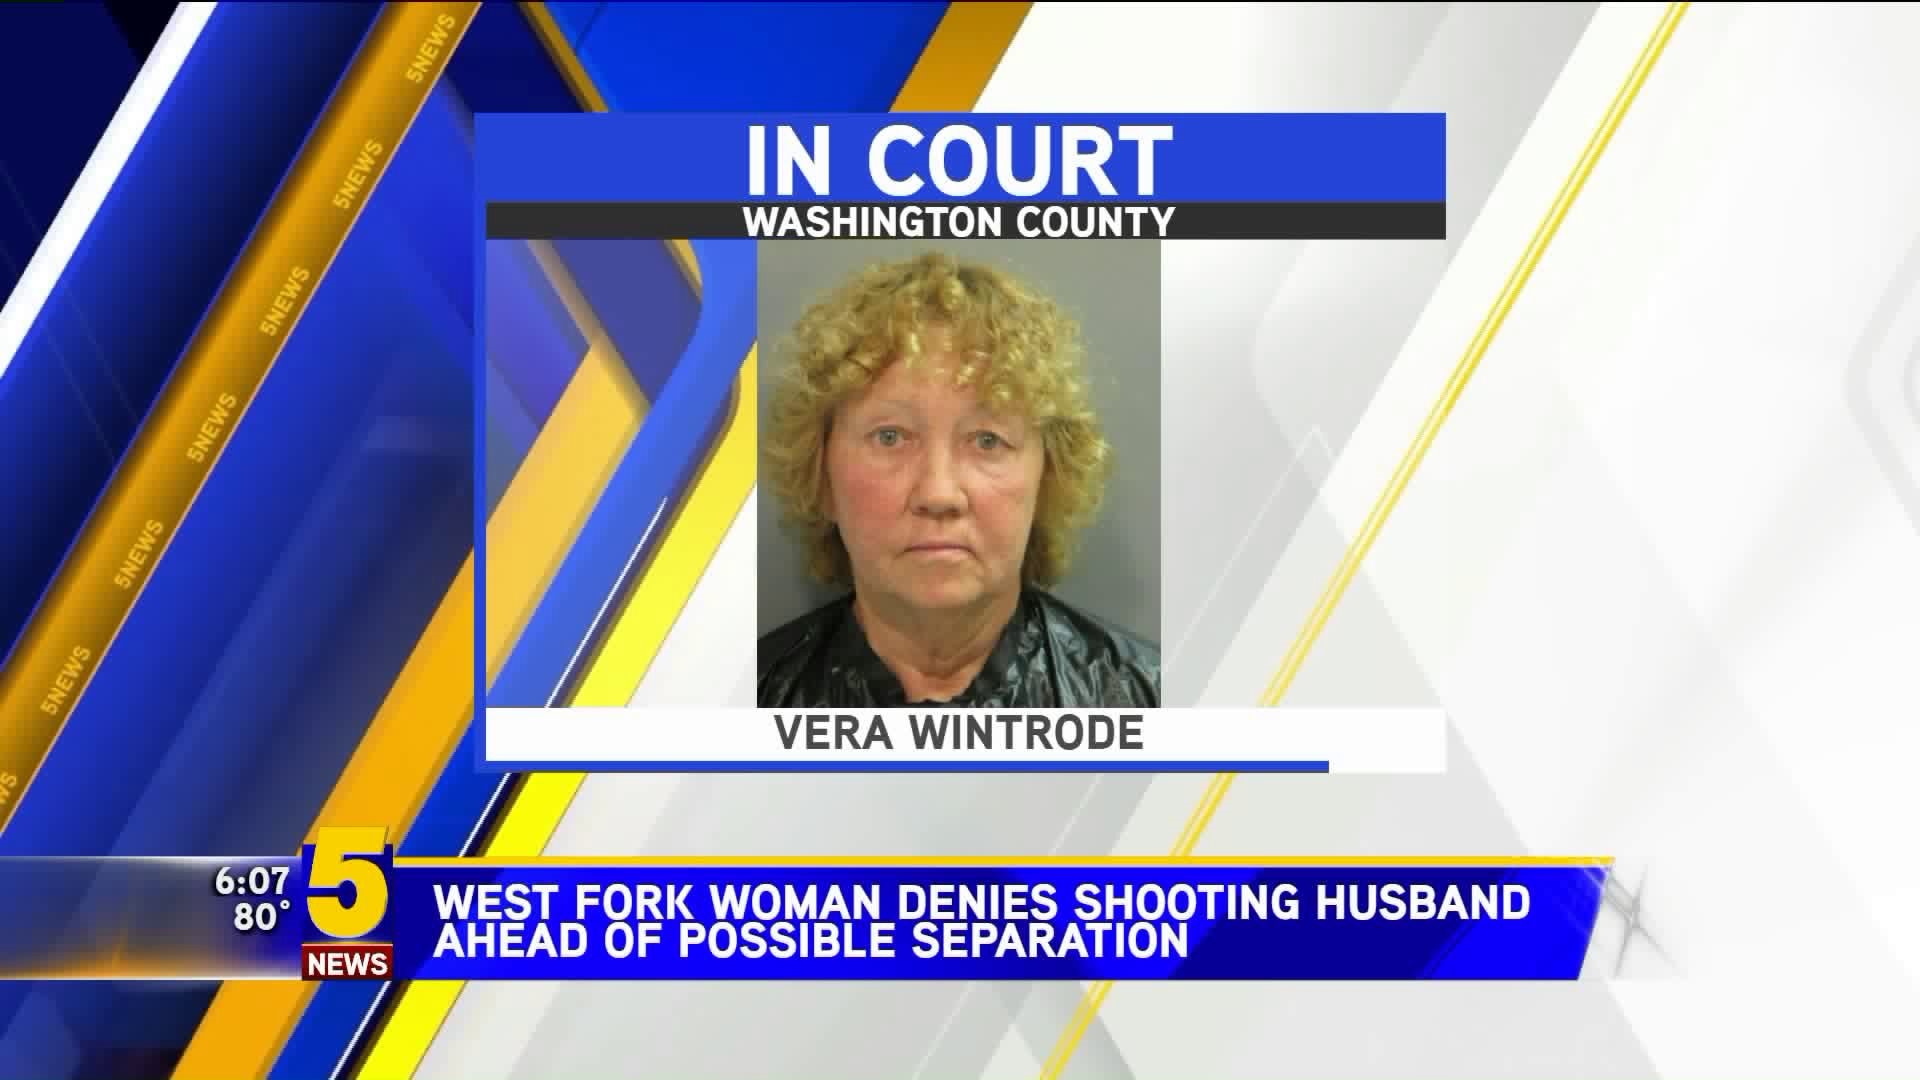 West Fork Woman Denies Shooting Husband Ahead of Possible Separation